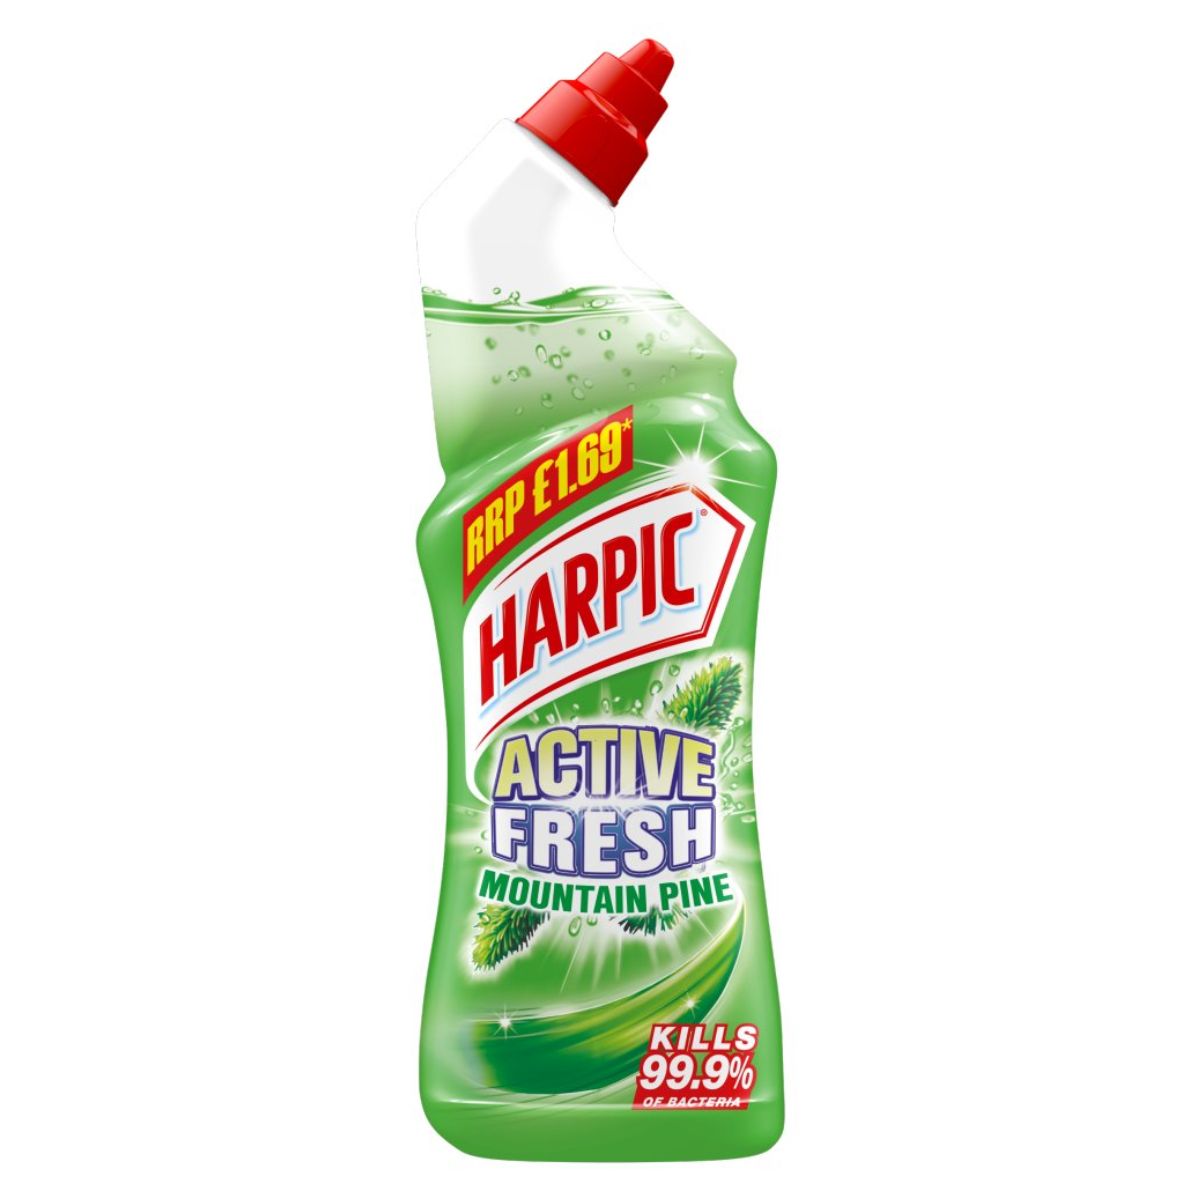 A bottle of Harpic - Active Fresh Pine - 750ml on a white background.